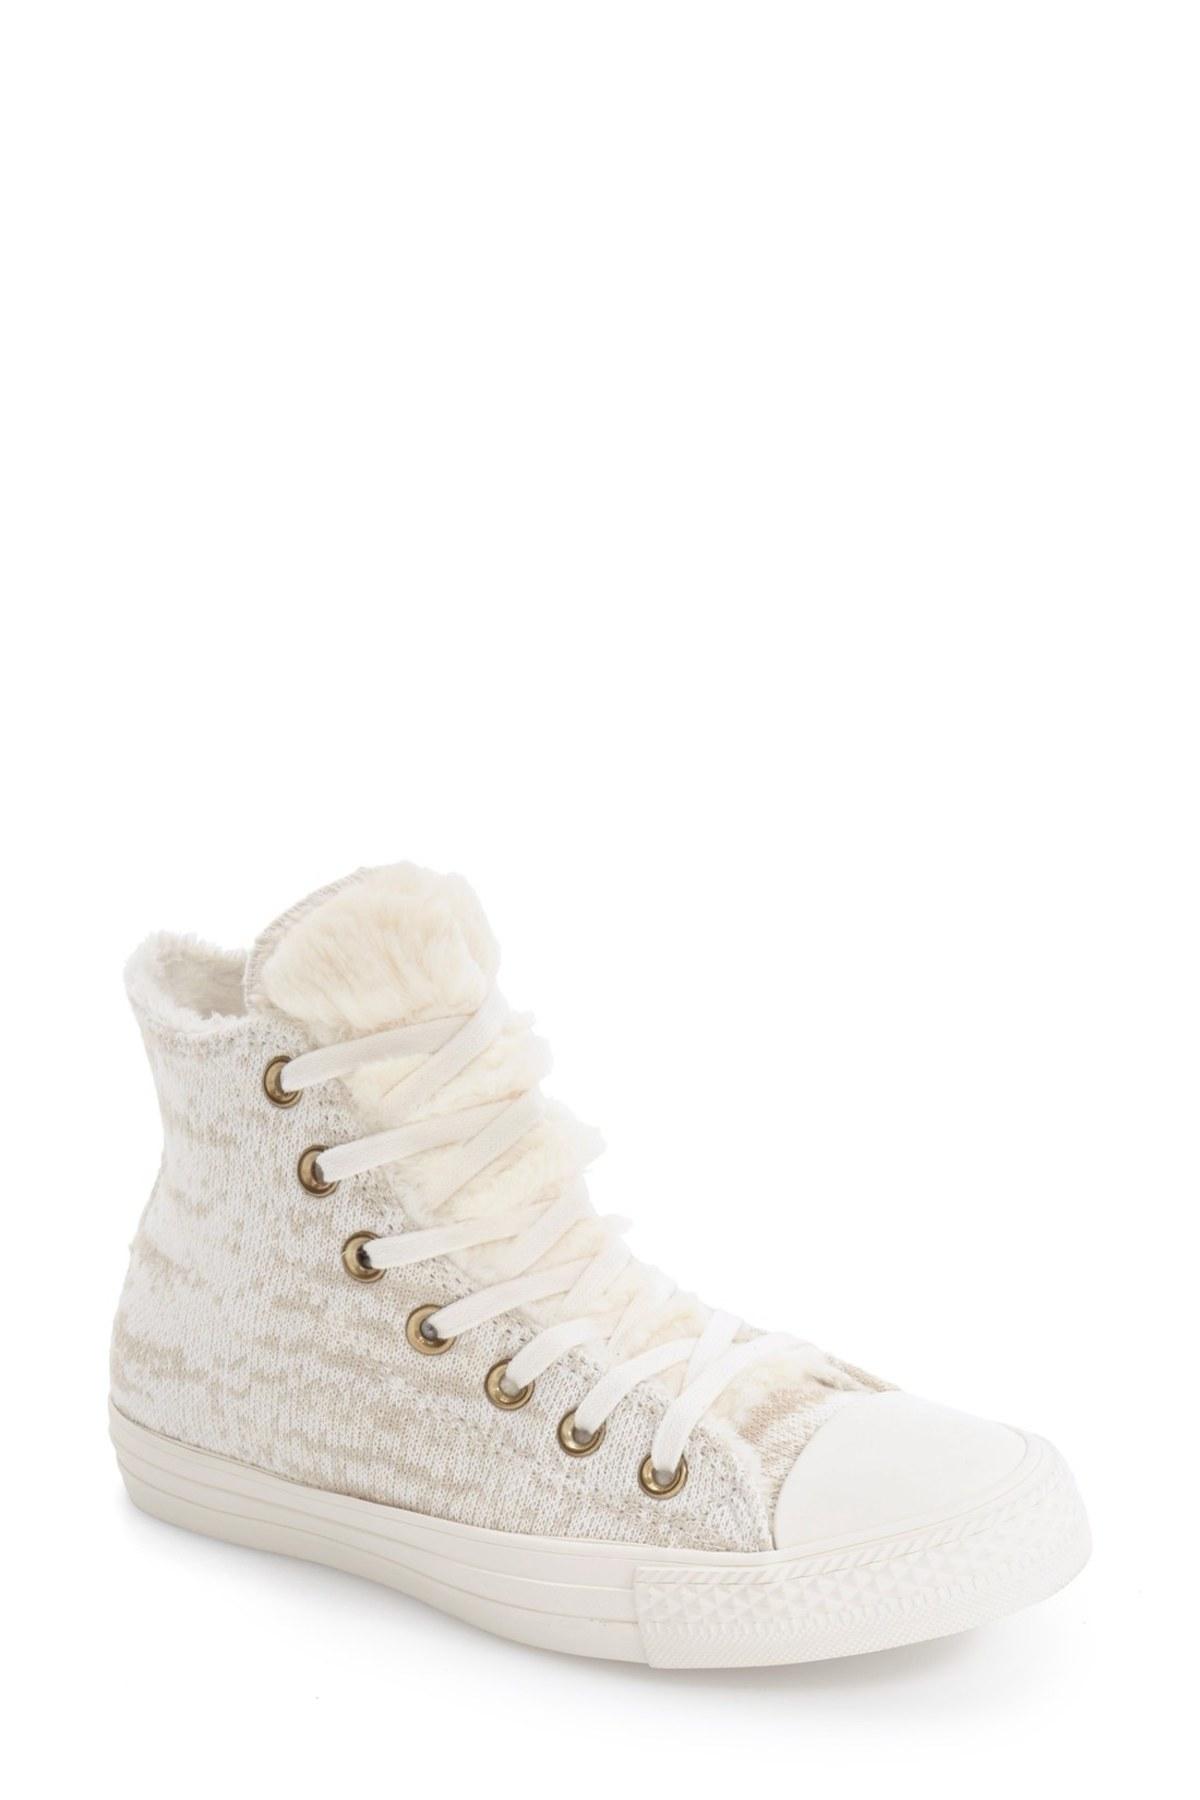 Converse Chuck Taylor(r) All Star(r) Winter Faux Fur Lined Knit High Top  (women) in White - Lyst